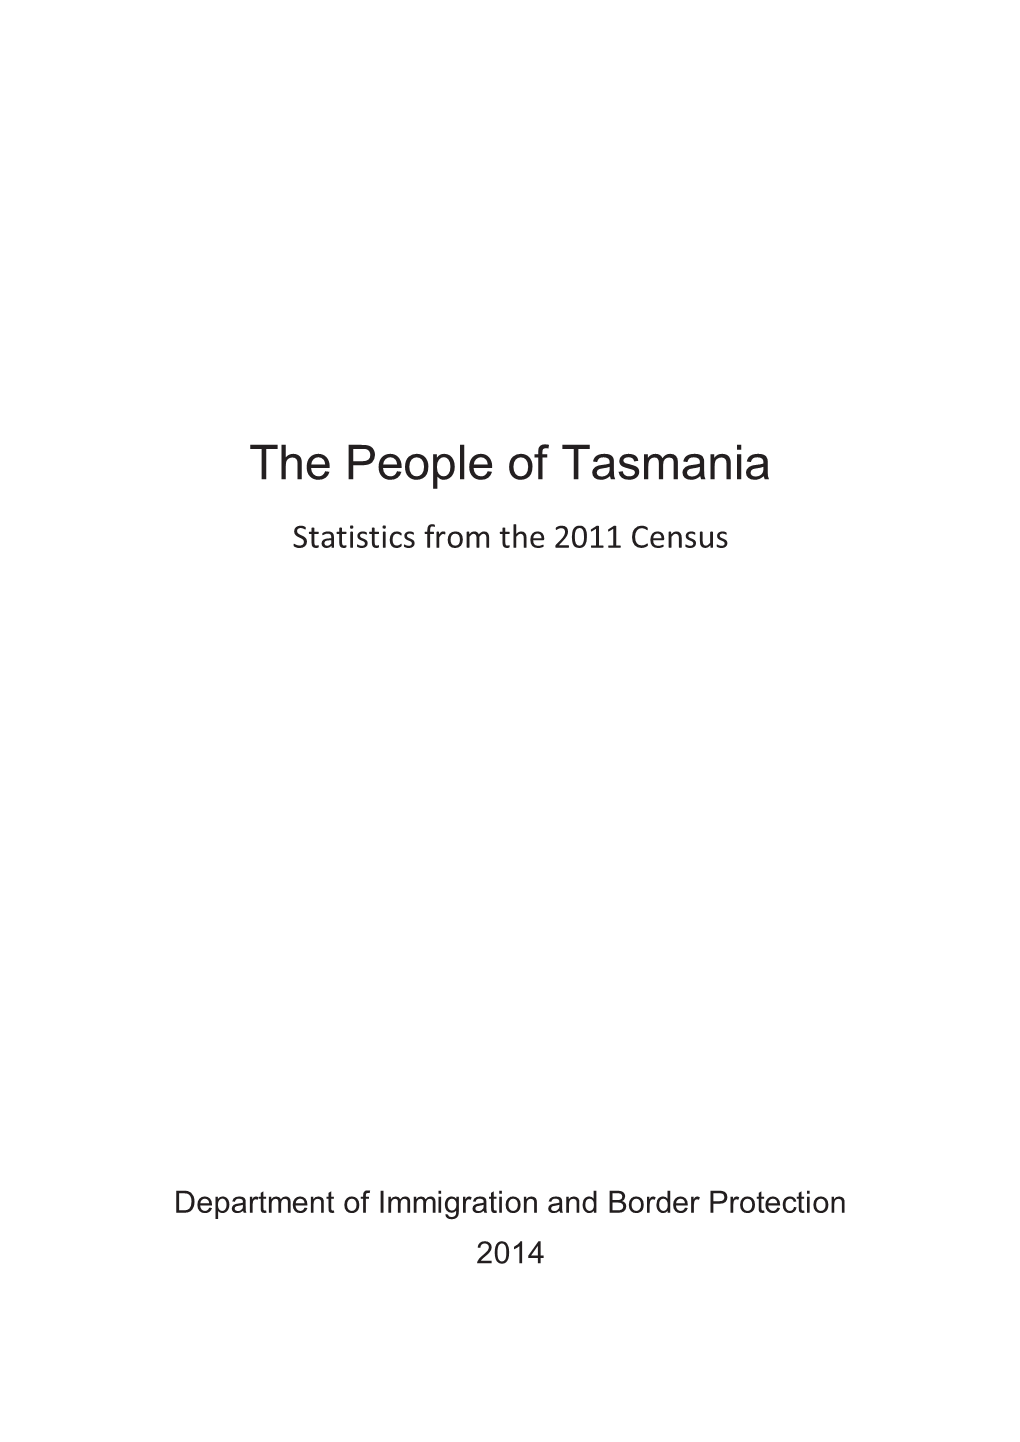 The People of Tasmania: Statistics from The